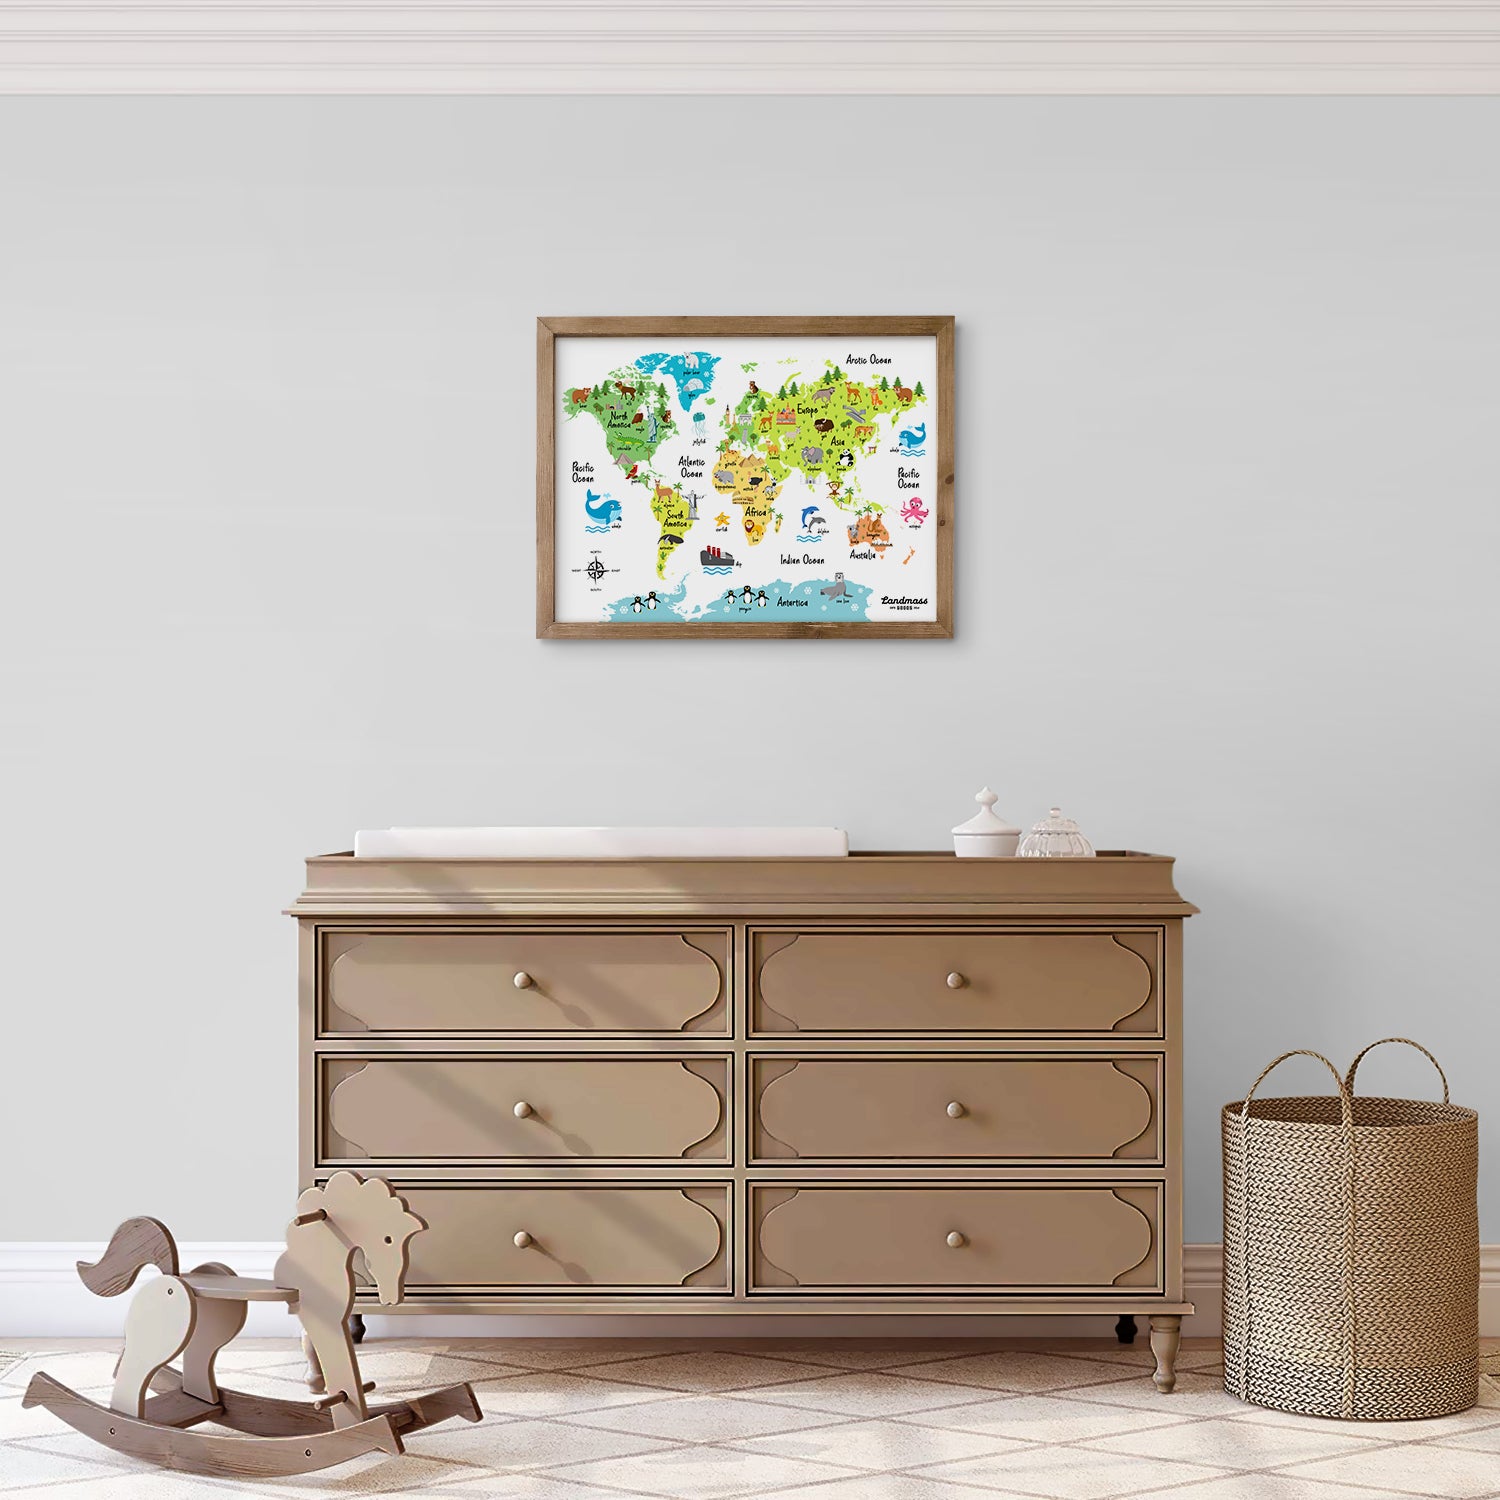 Colorful Children's Animal World Map Poster - 12x16 inches